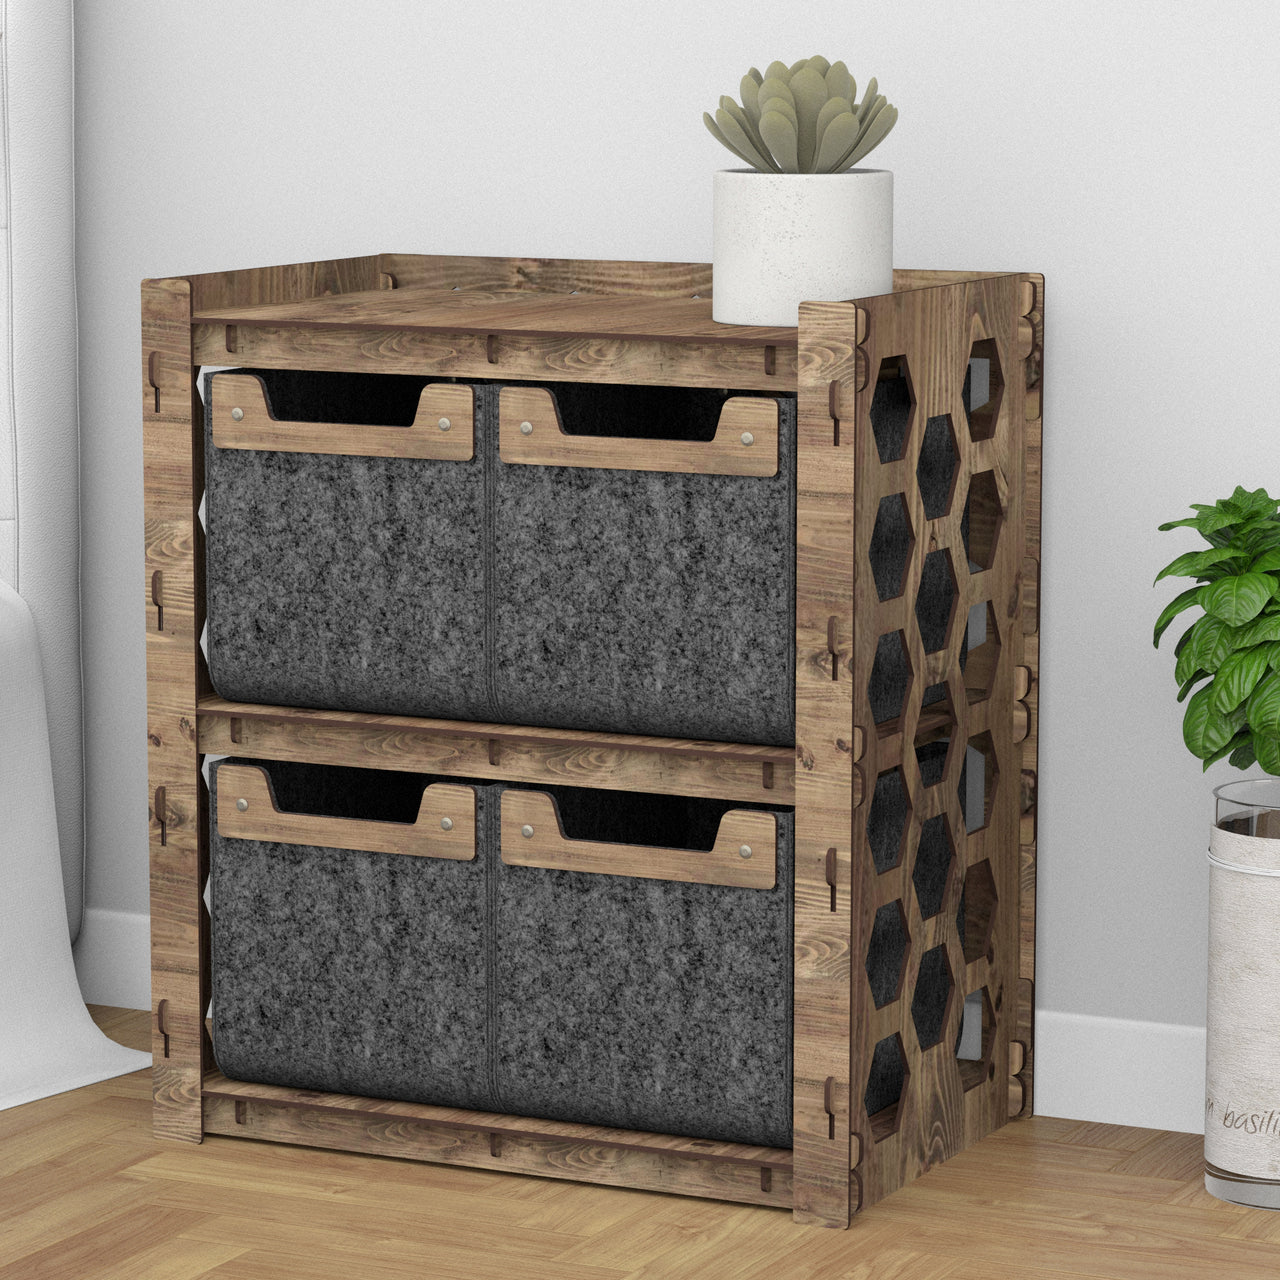 Honeycomb Bedside Table Nightstand 4 Drawers [4 SMALL BLACK BINS]